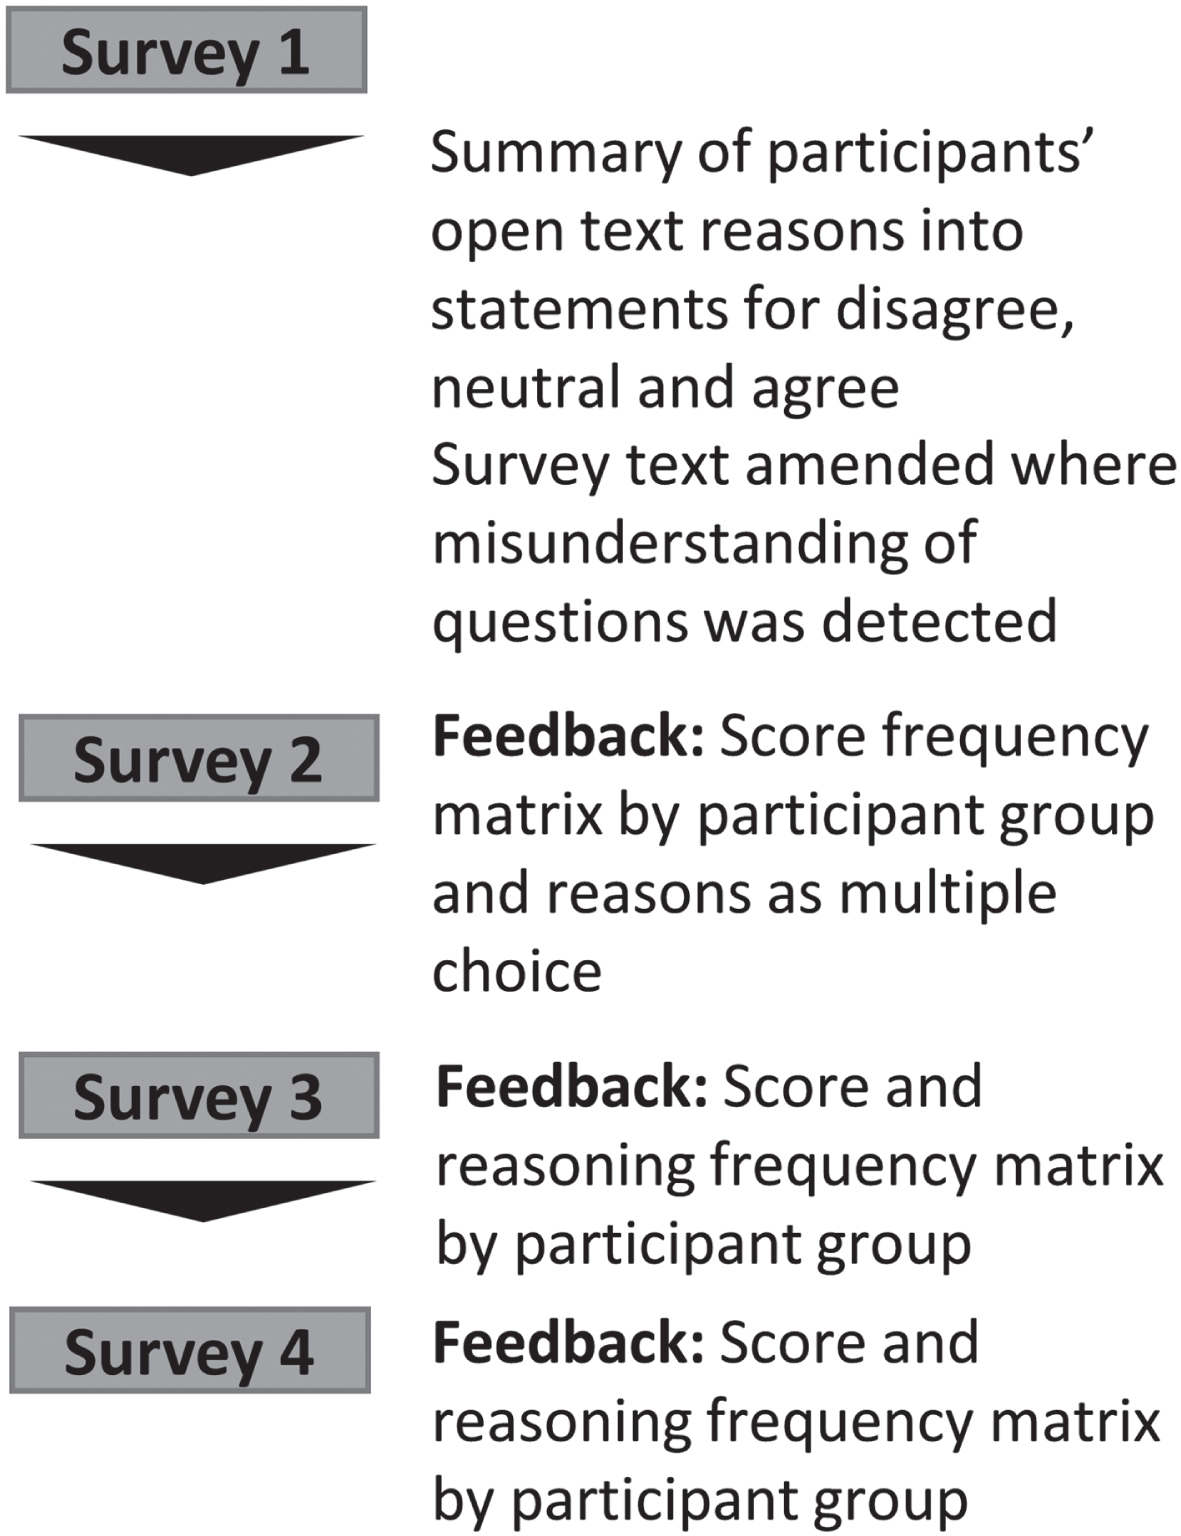 Study overview. A summary of survey edits and type of feedback supplied to participant within each survey.